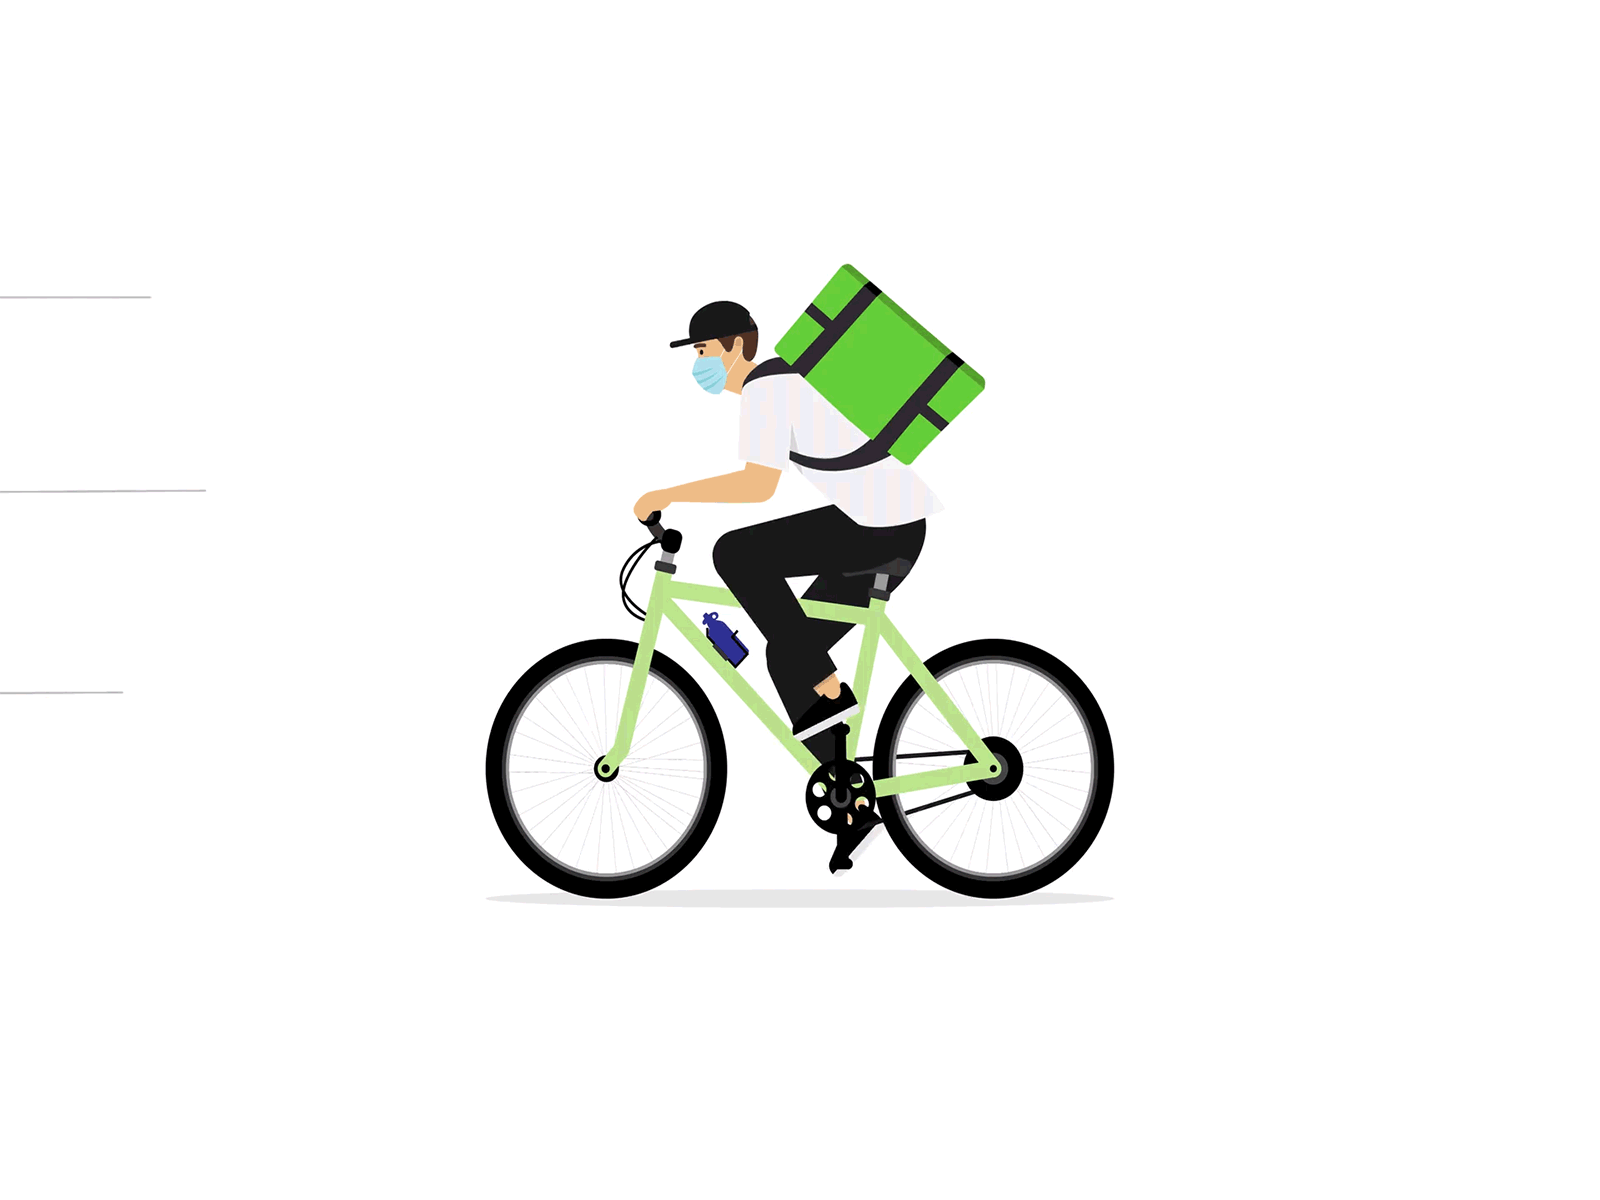 Deliveryman rides on bike animation bike box business character courier deliver delivery express fast food logistic mobile online pizza quarantine ride sale service shipping